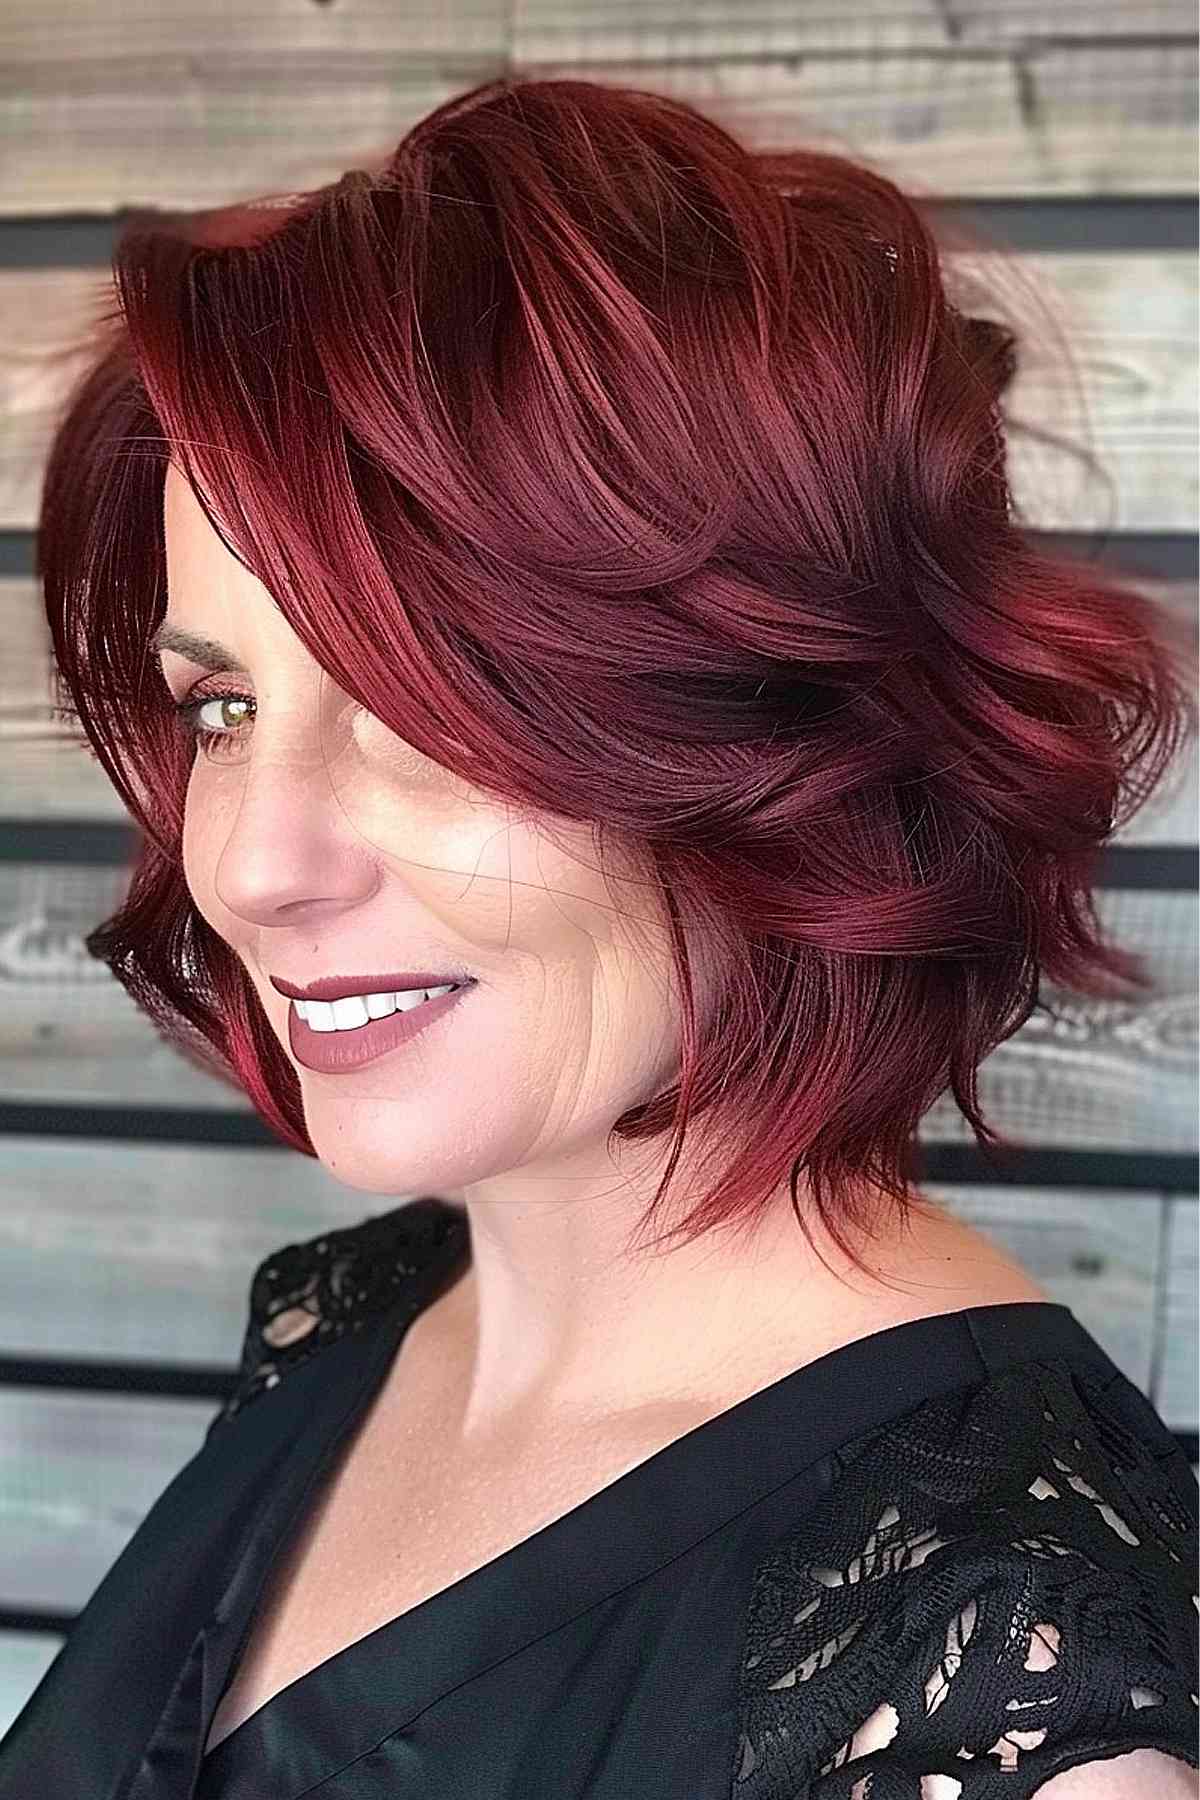 Short feathered cherry red hairstyle, adding volume to fine hair.